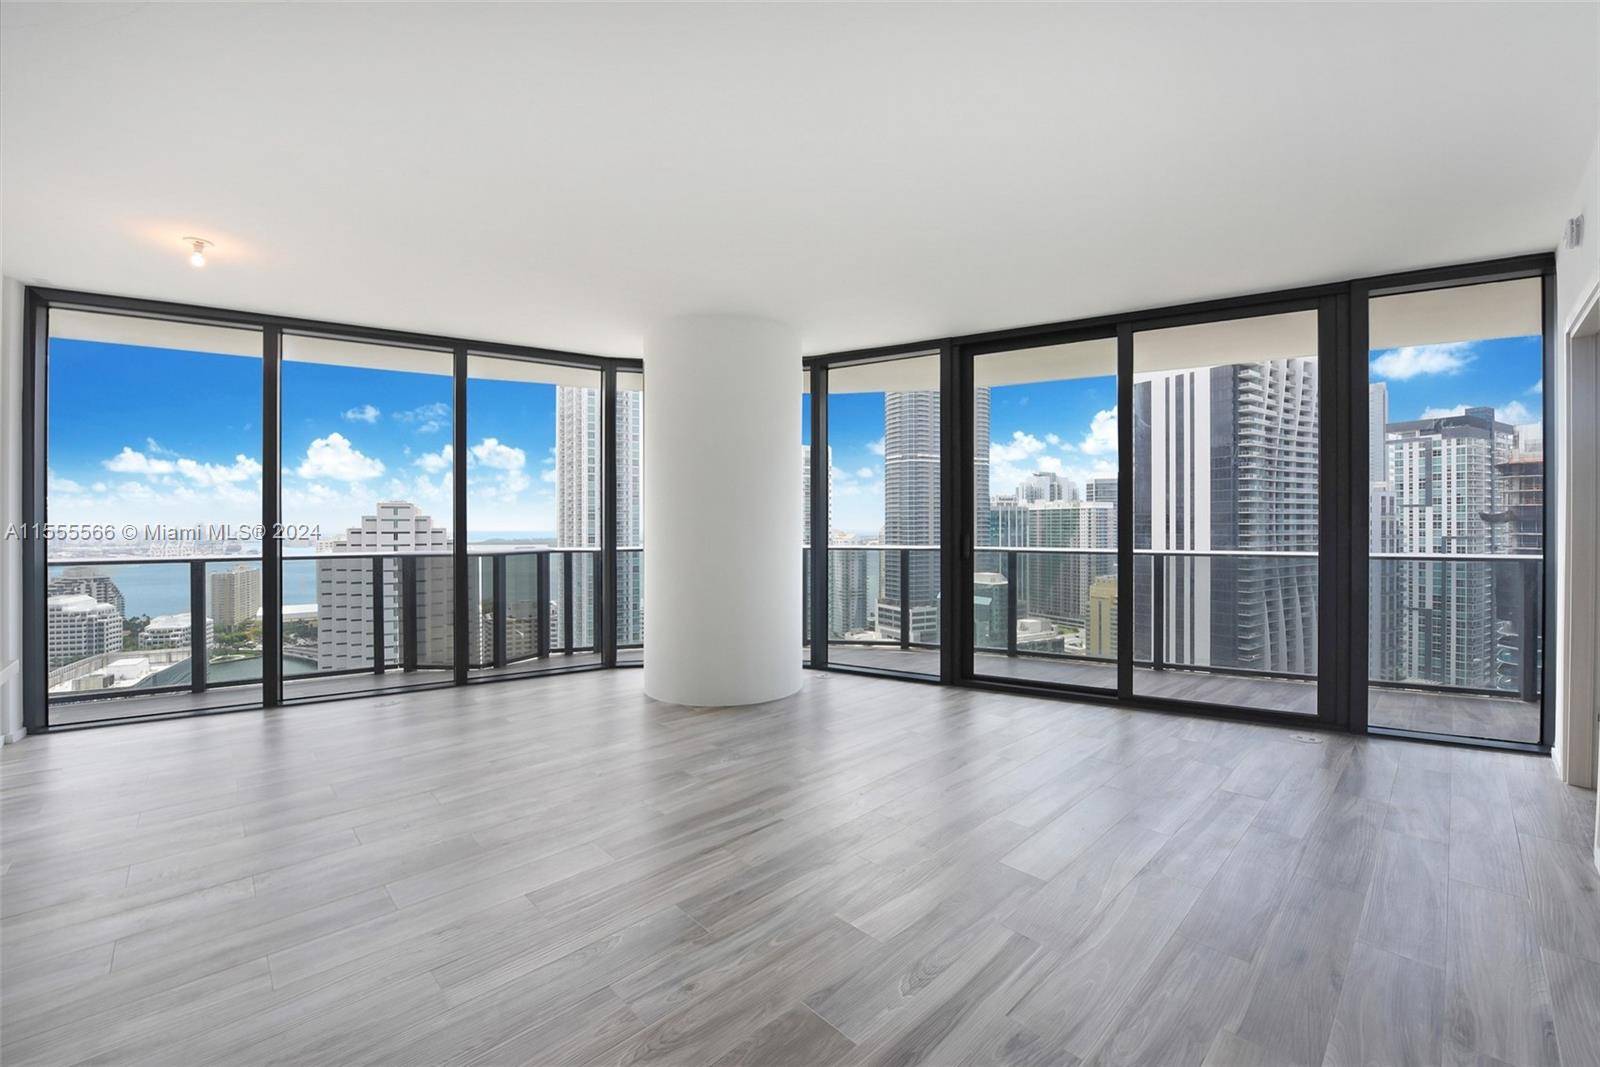 Live in the heart of Brickell and enjoy SLS LUX lifestyle every day.